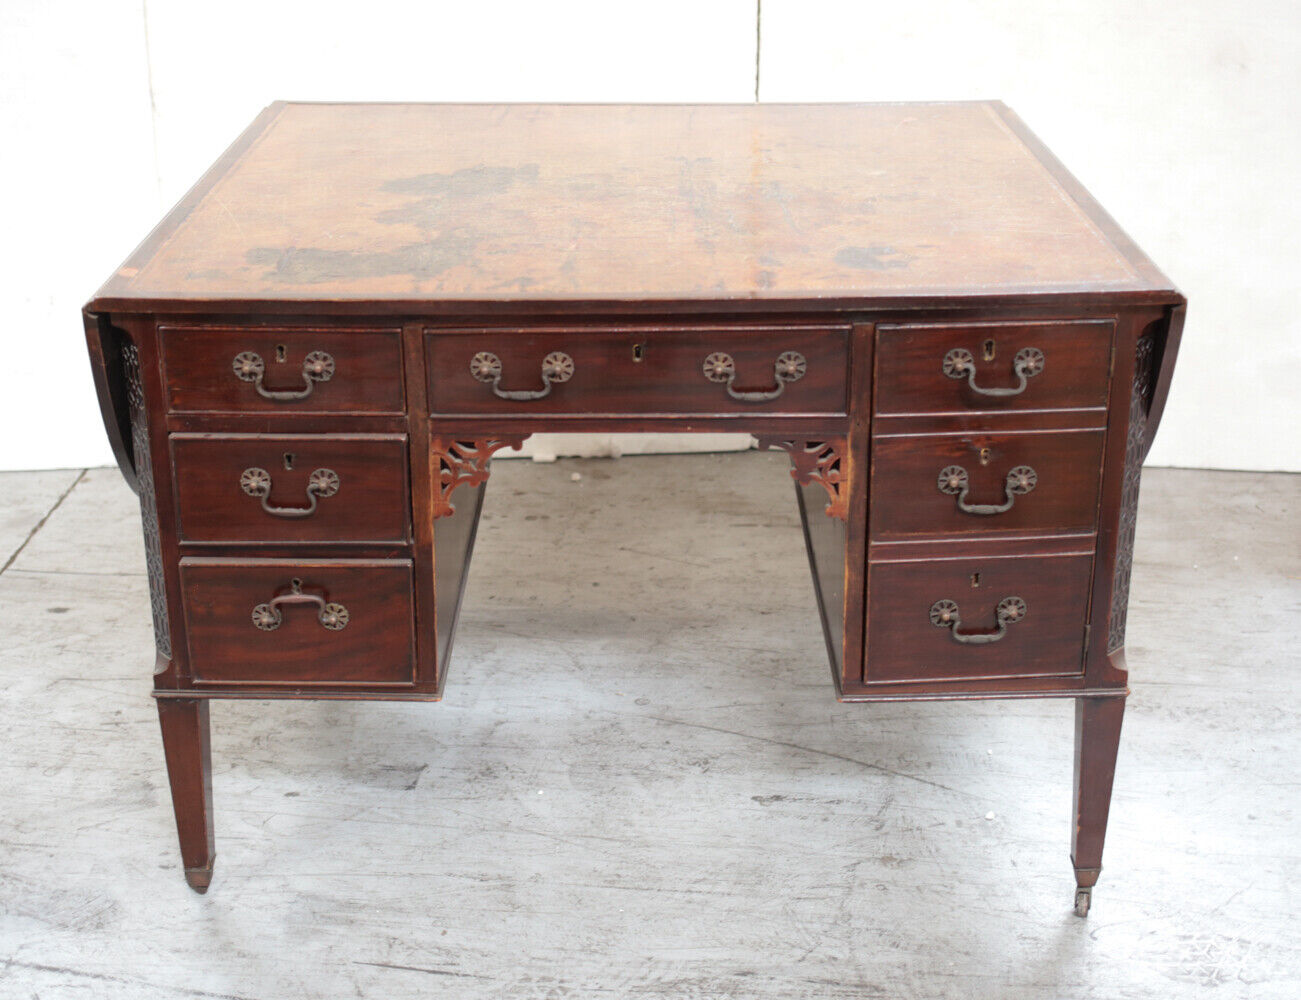 19th century Continental Mahogany Partners desk with leather top and side panels